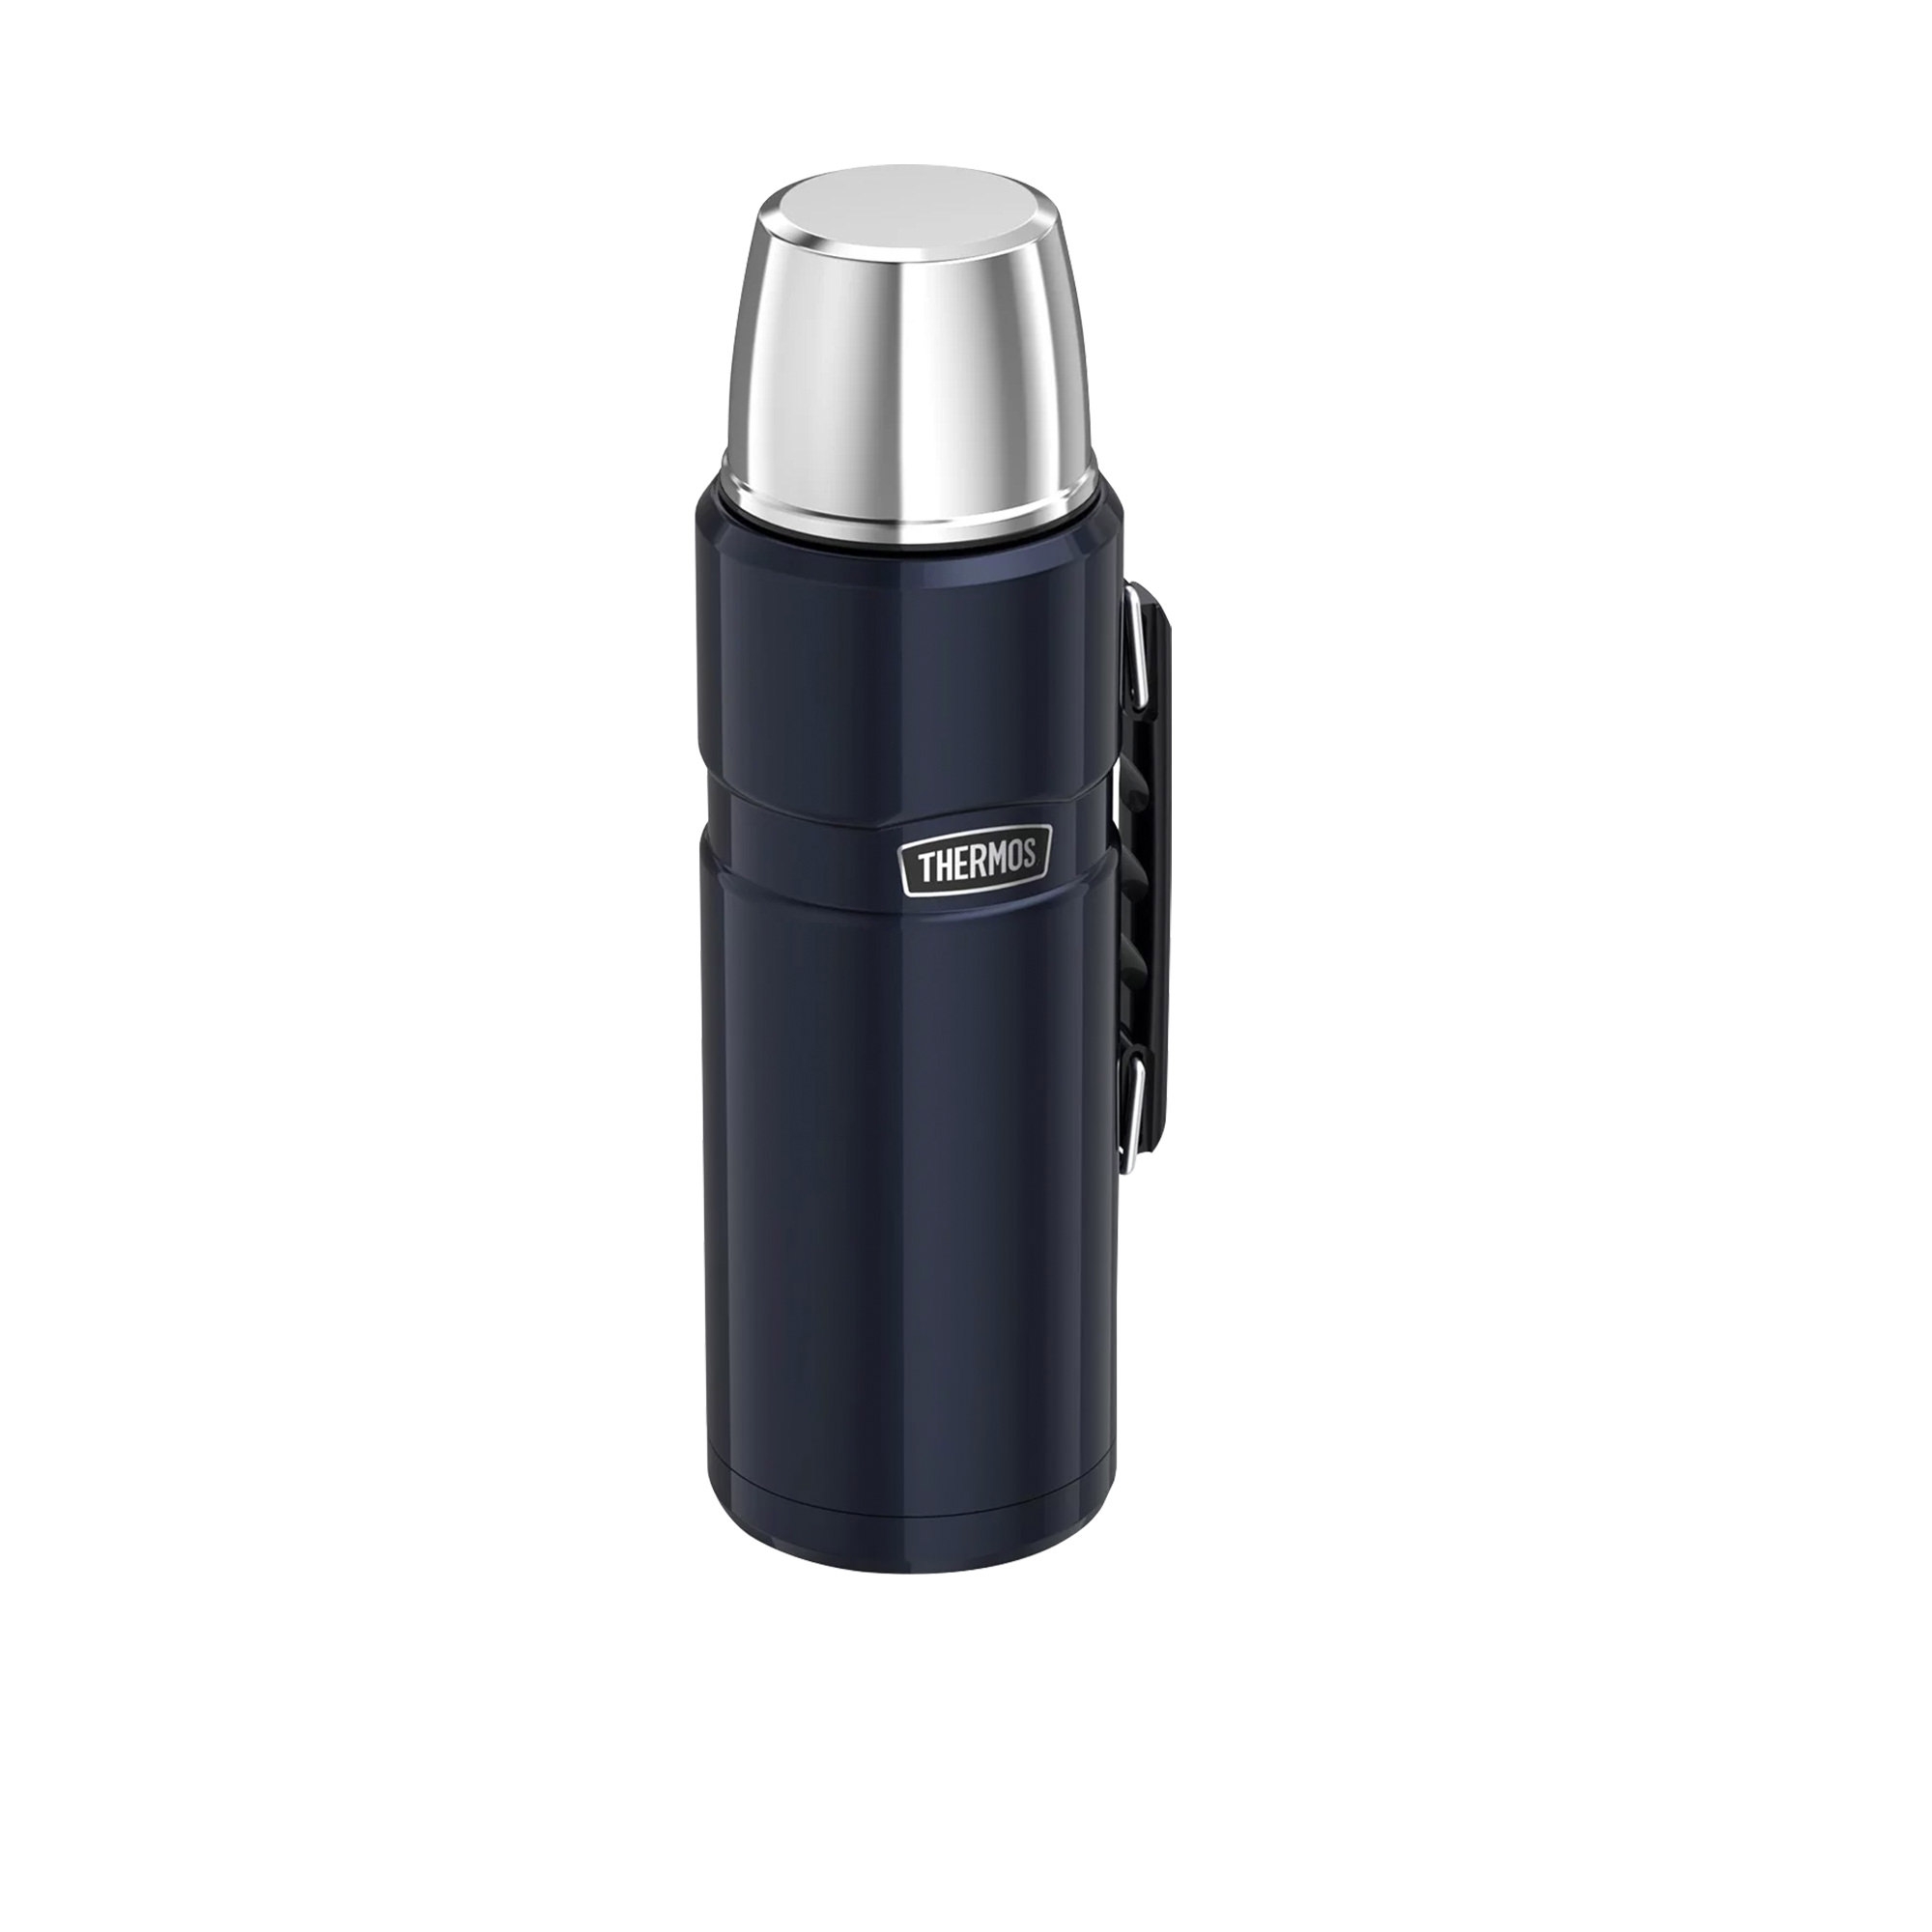 Thermos Stainless King Insulated Flask 1.2L Midnight Blue Image 2